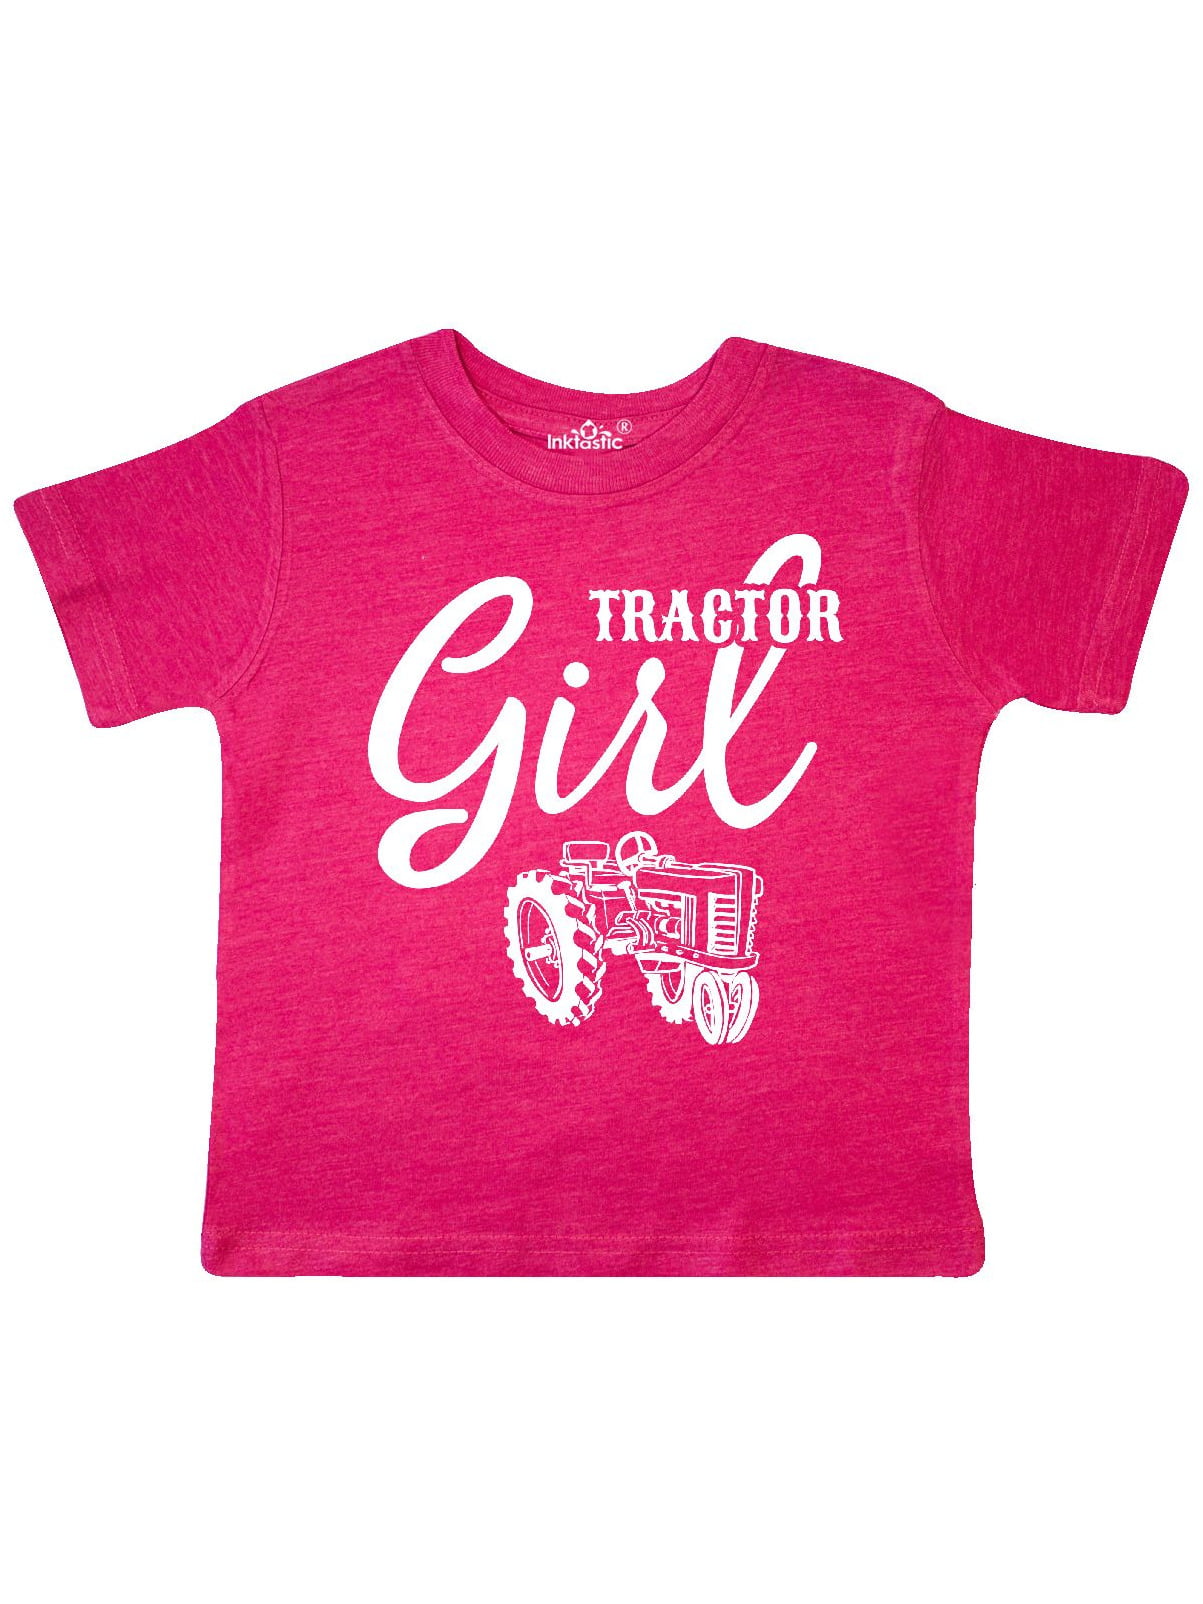 inktastic Tractor Woman Toddler T-Shirt 